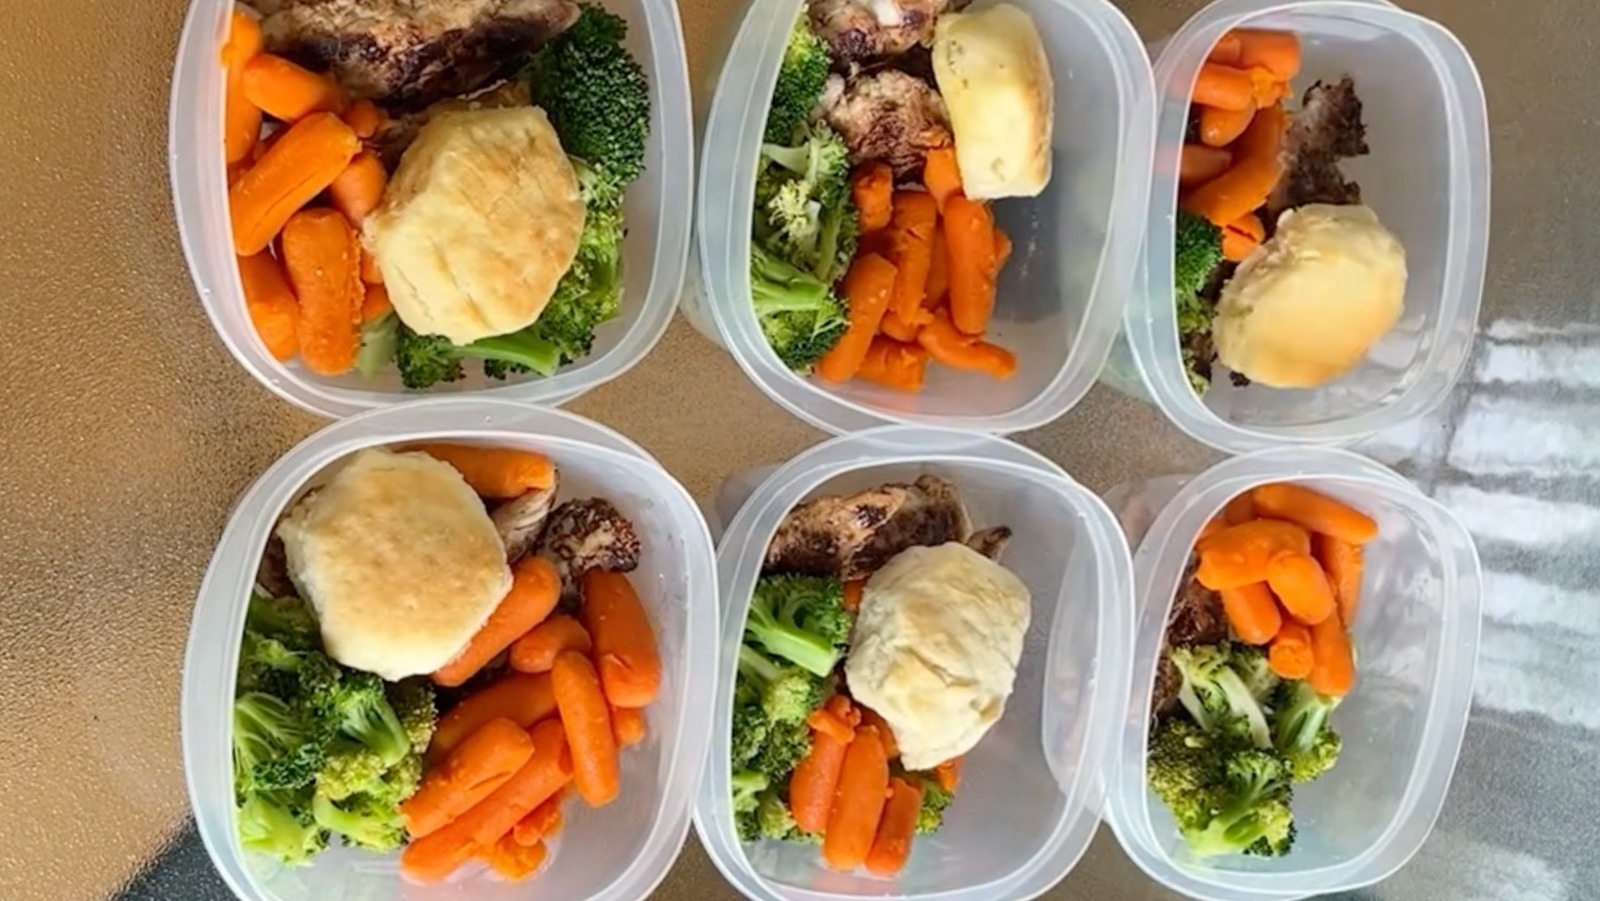 Cracker Barrel's Meal Prep Hack Is Sure To Be A Major Time Saver